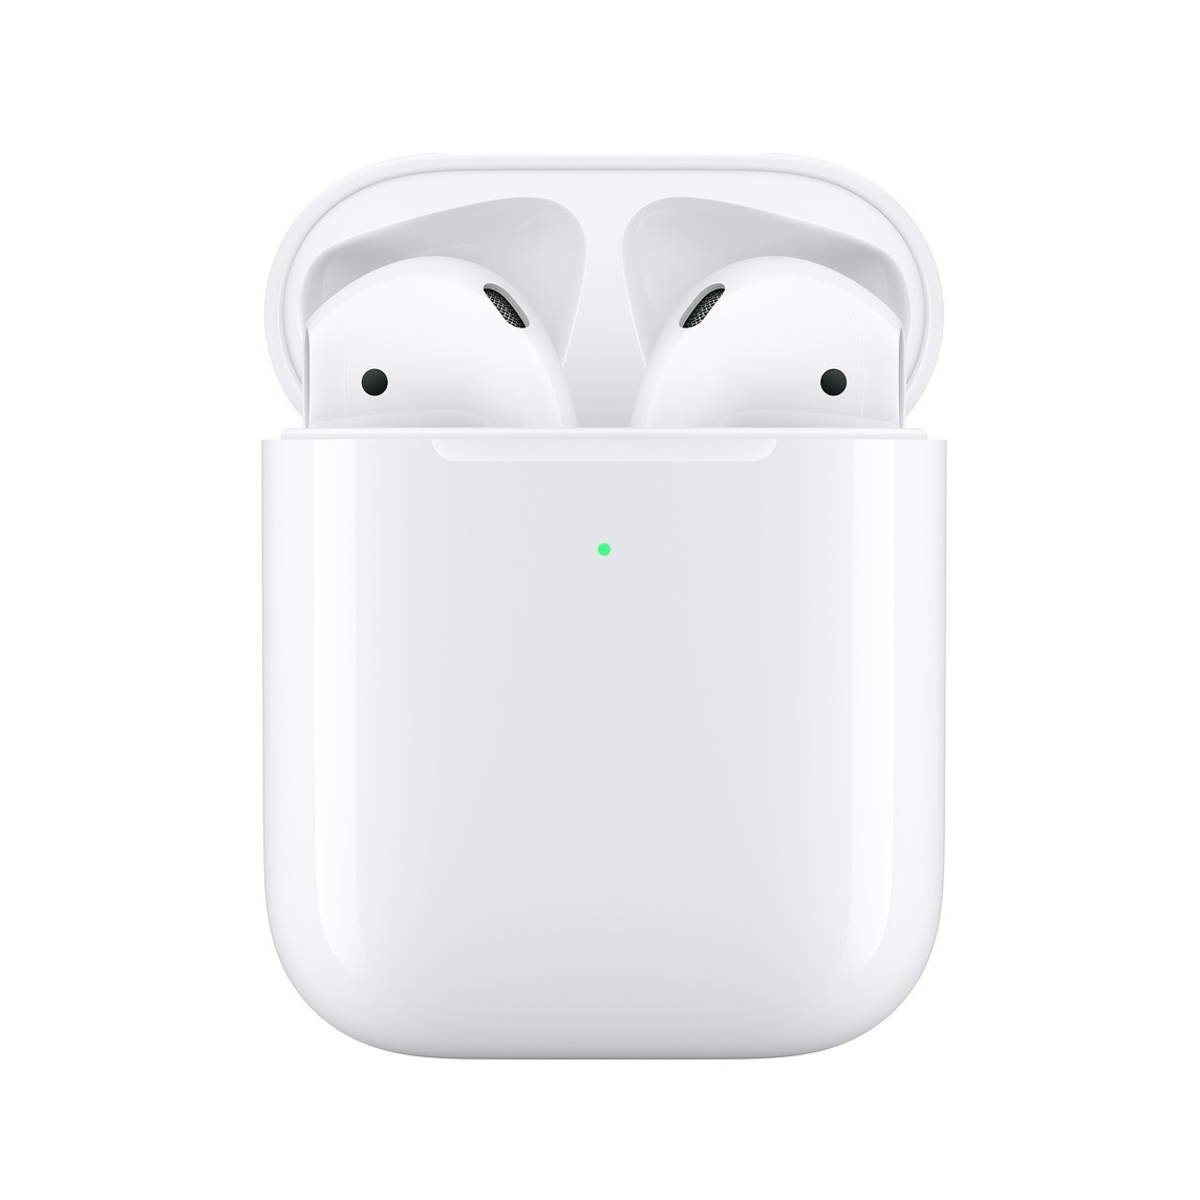 Apple AirPods 2019 with Wireless Charging Case MRXJ2Z